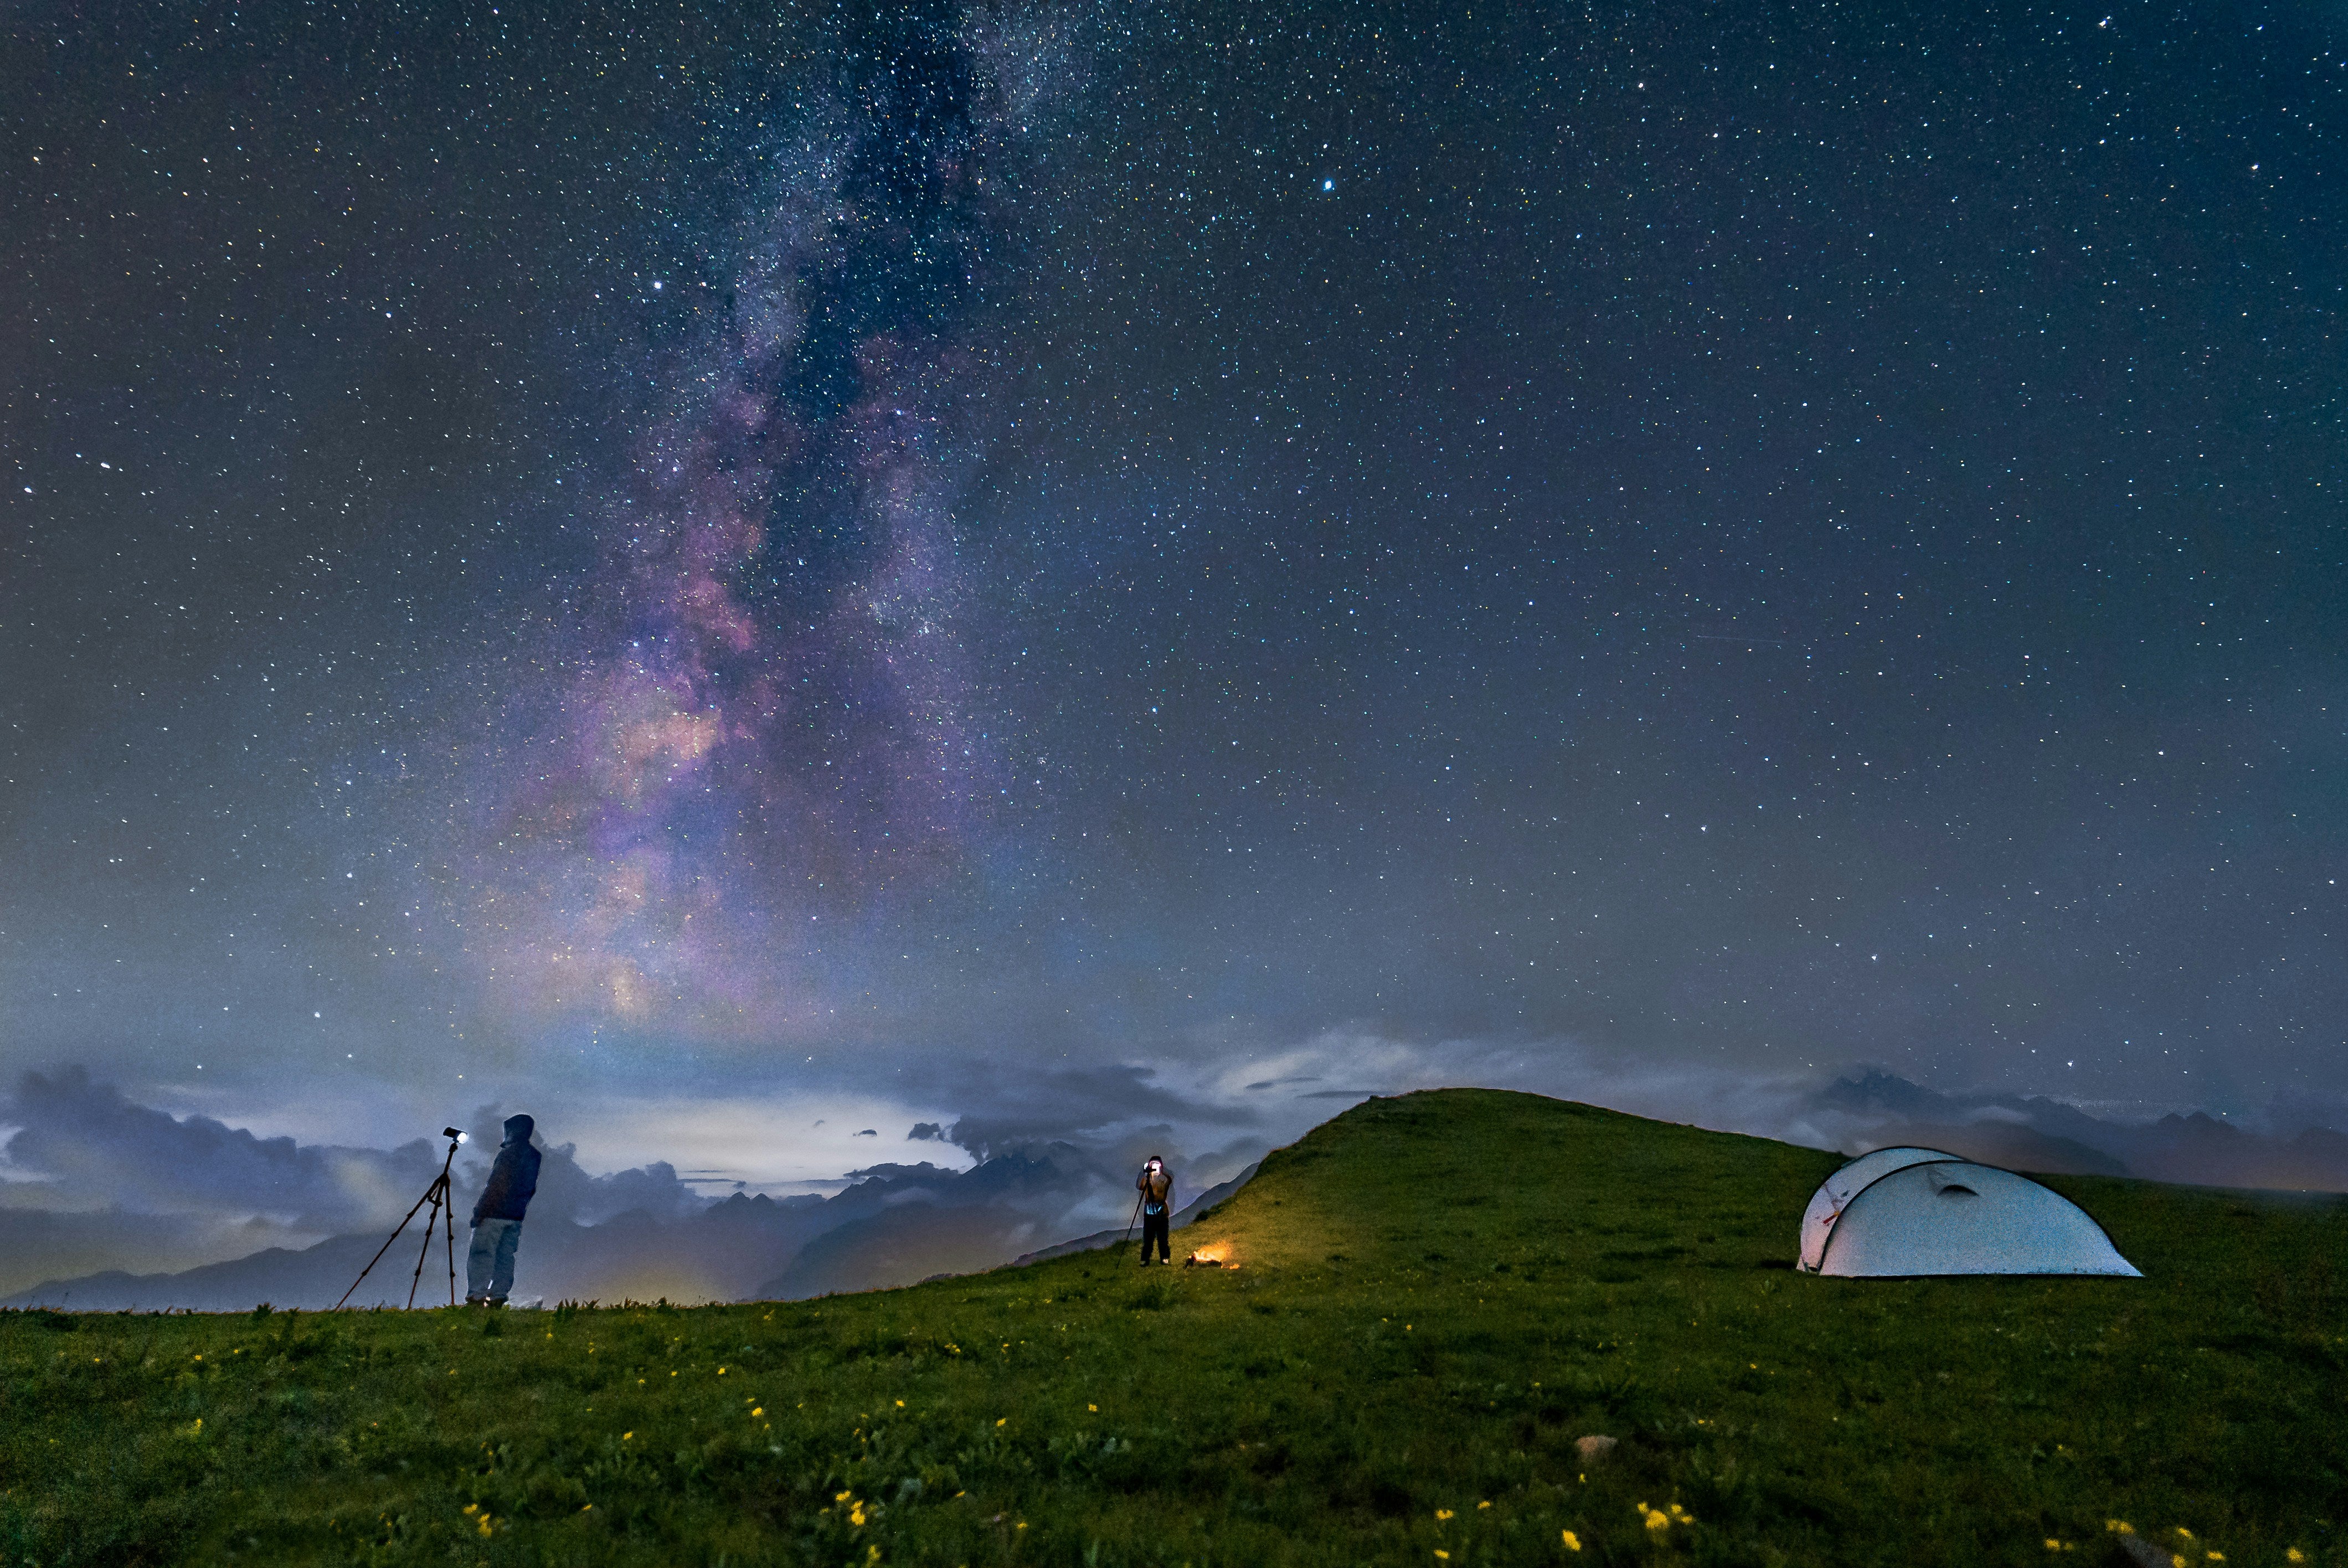 camping scene with the galaxy night sky in the background